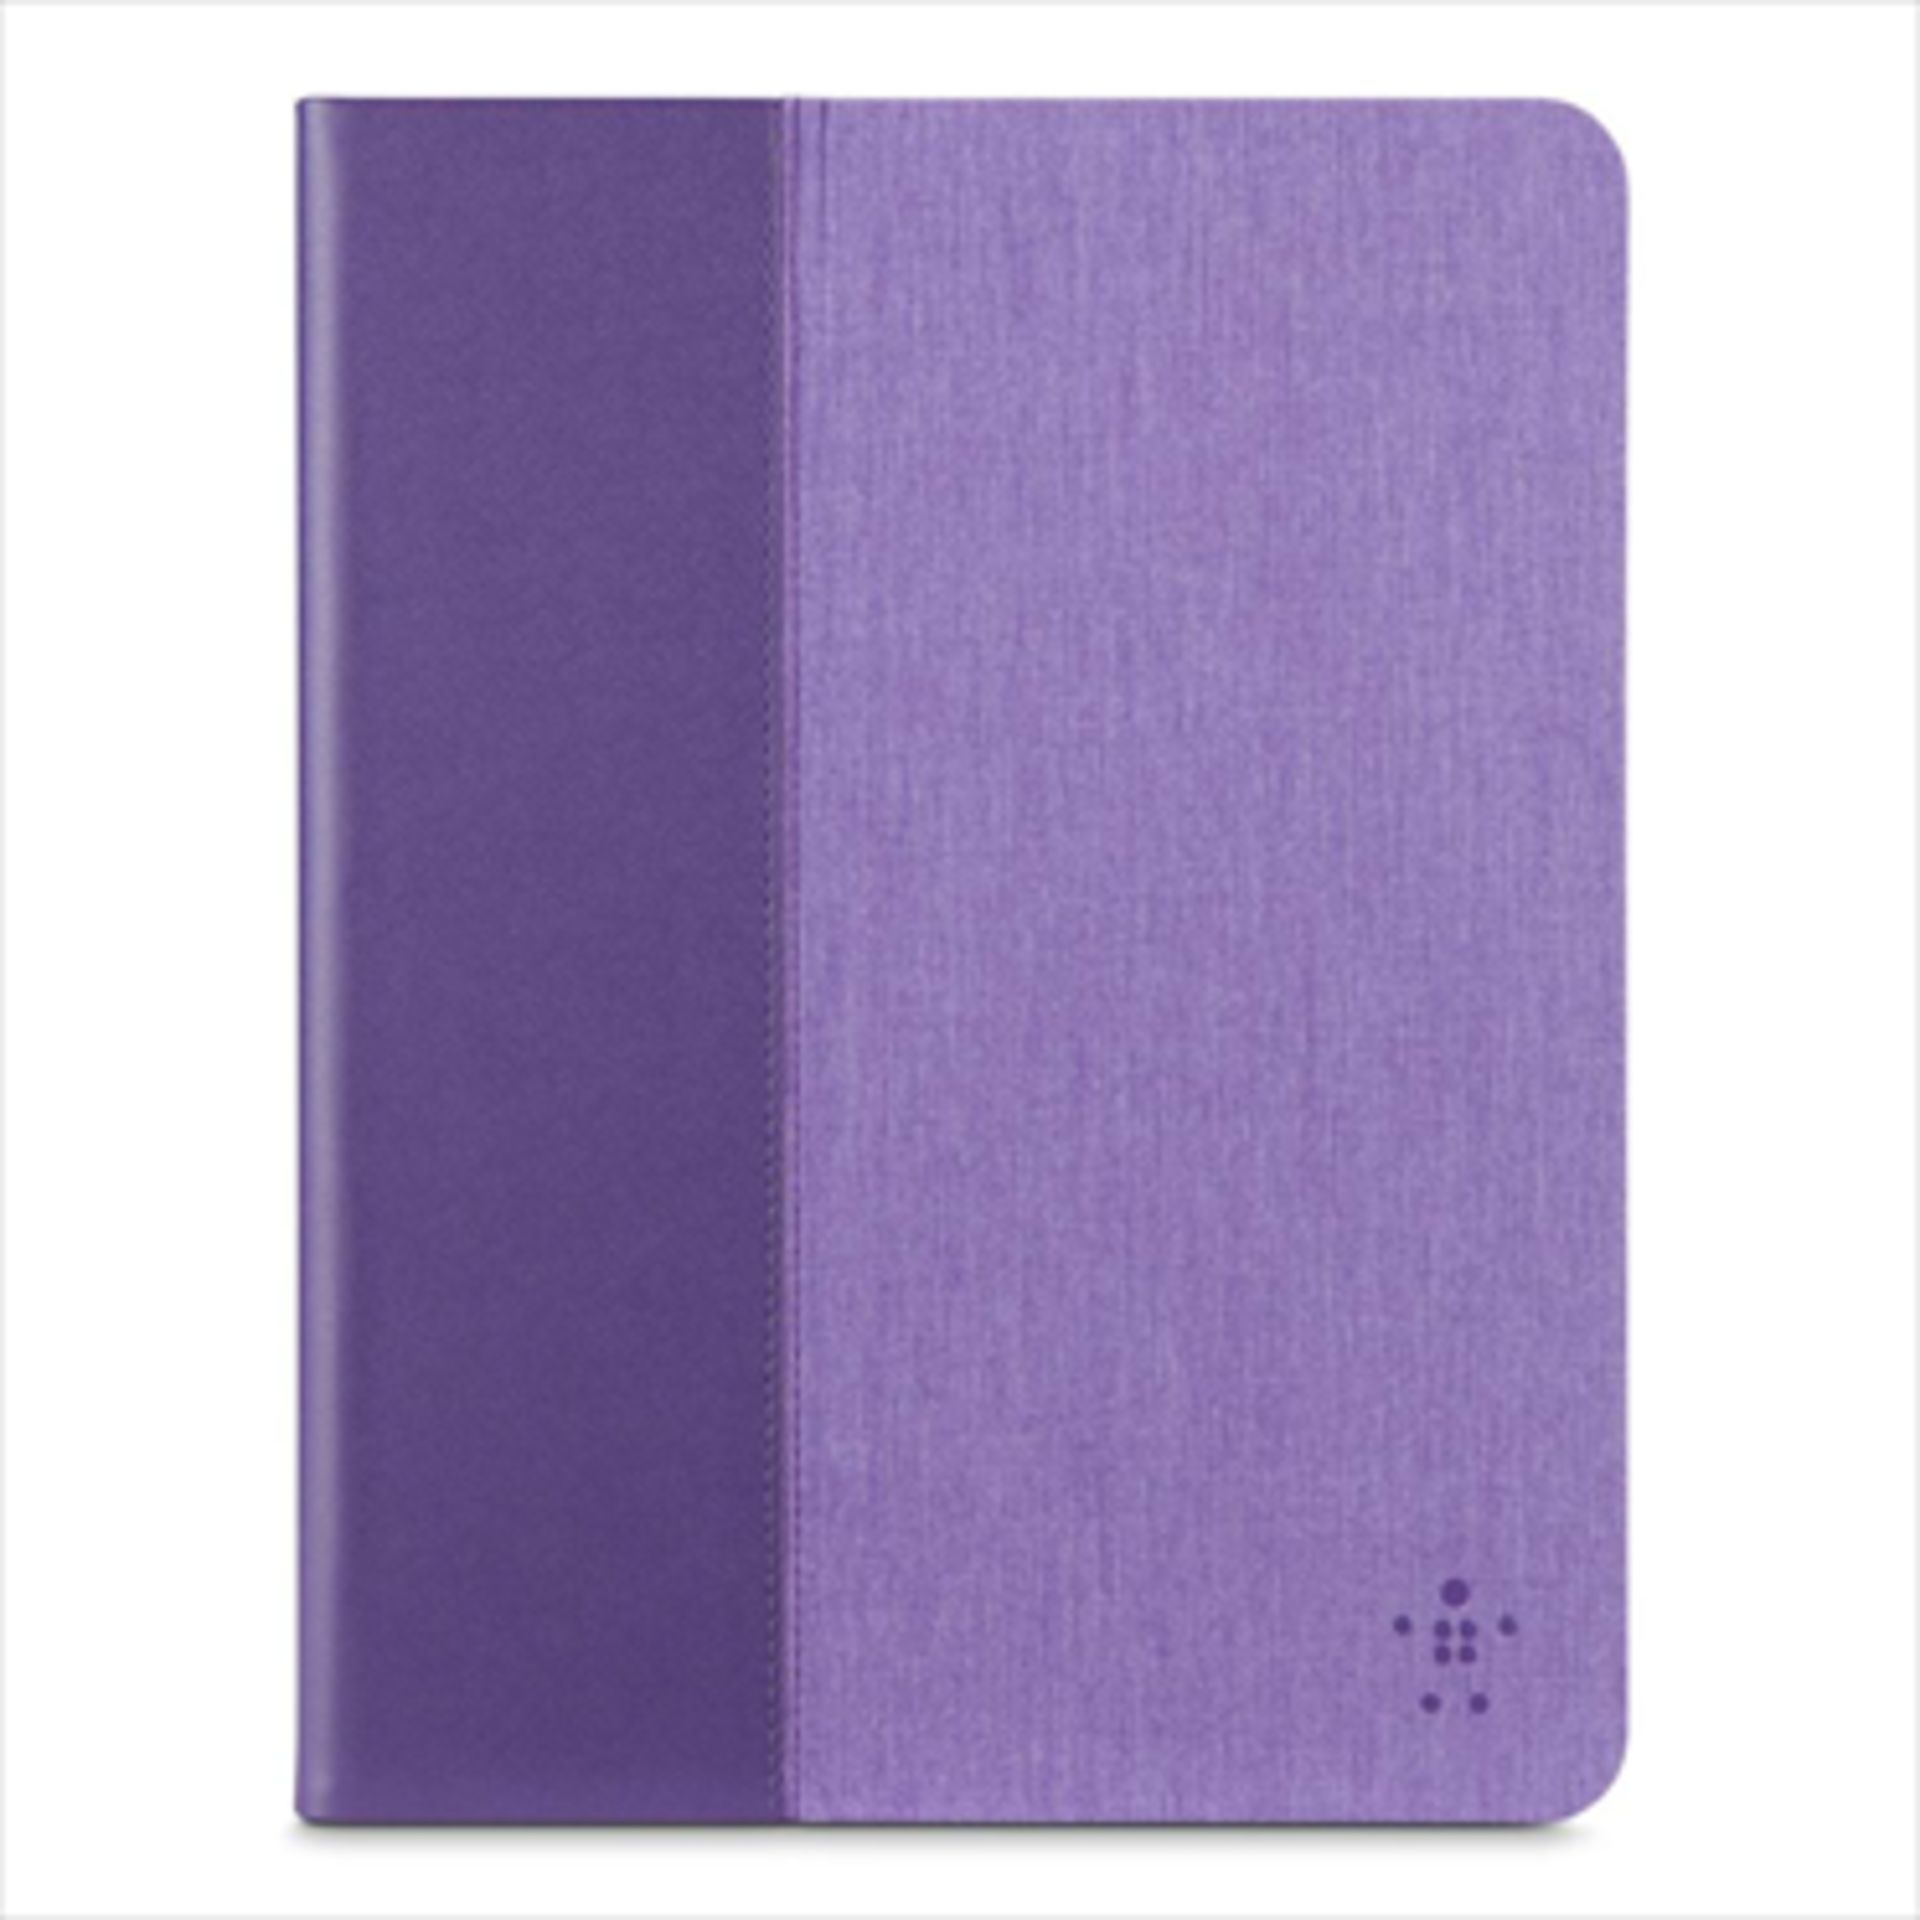 V *TRADE QTY* Brand New Belkin Purple Chambray Cover For iPad Air & iPad Air 2 - Slim Design -